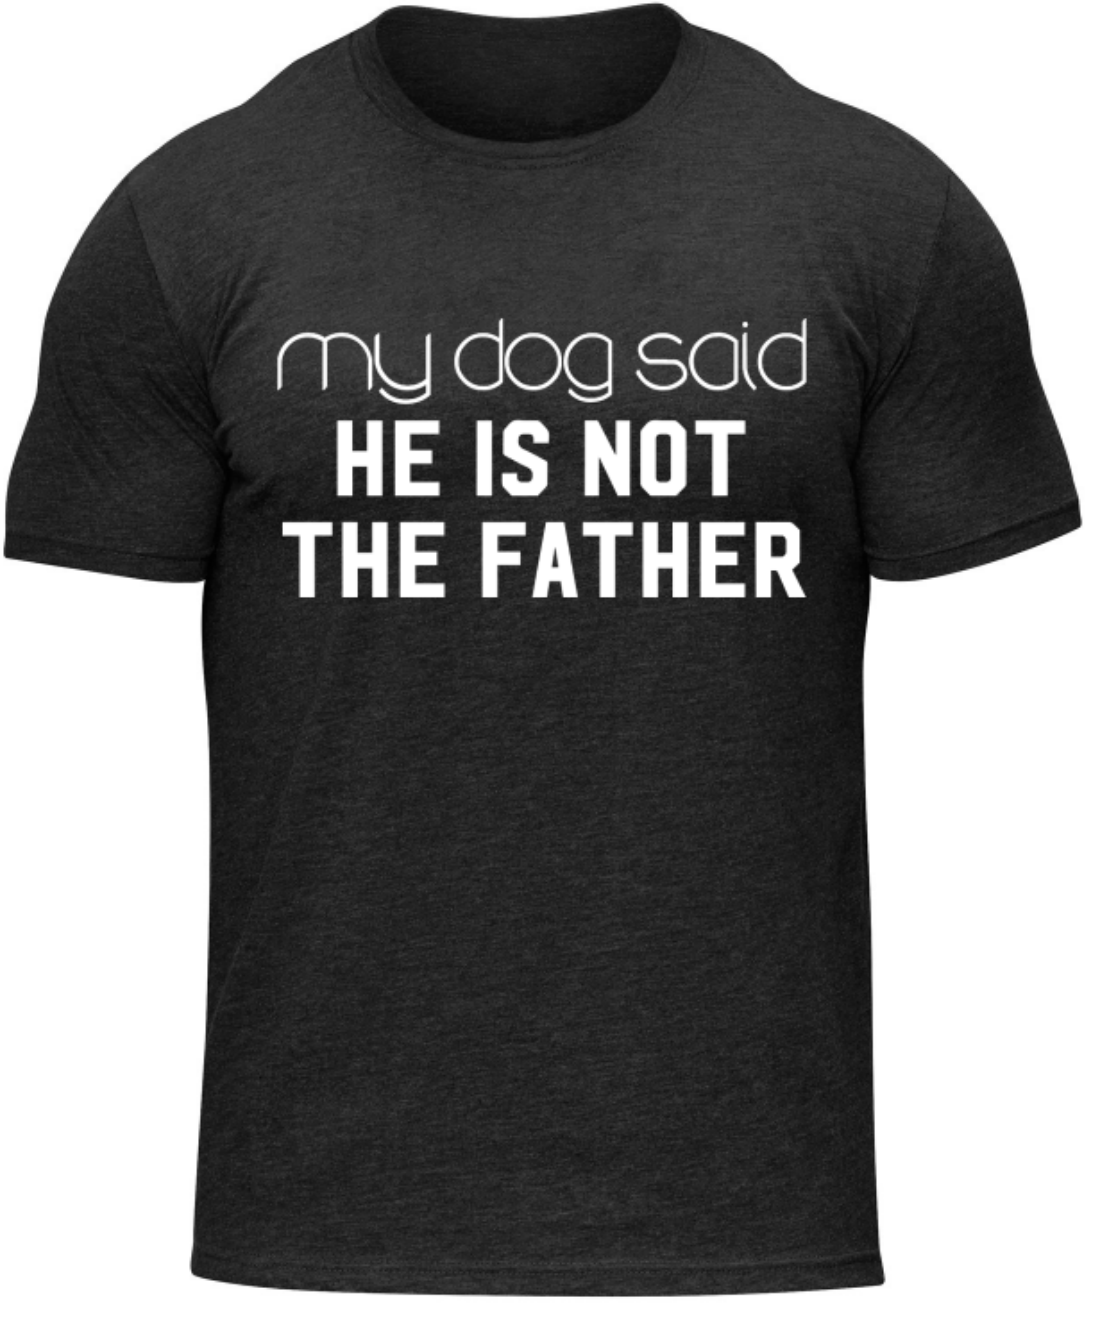 My Dog Said He is NOT the Father-Tee